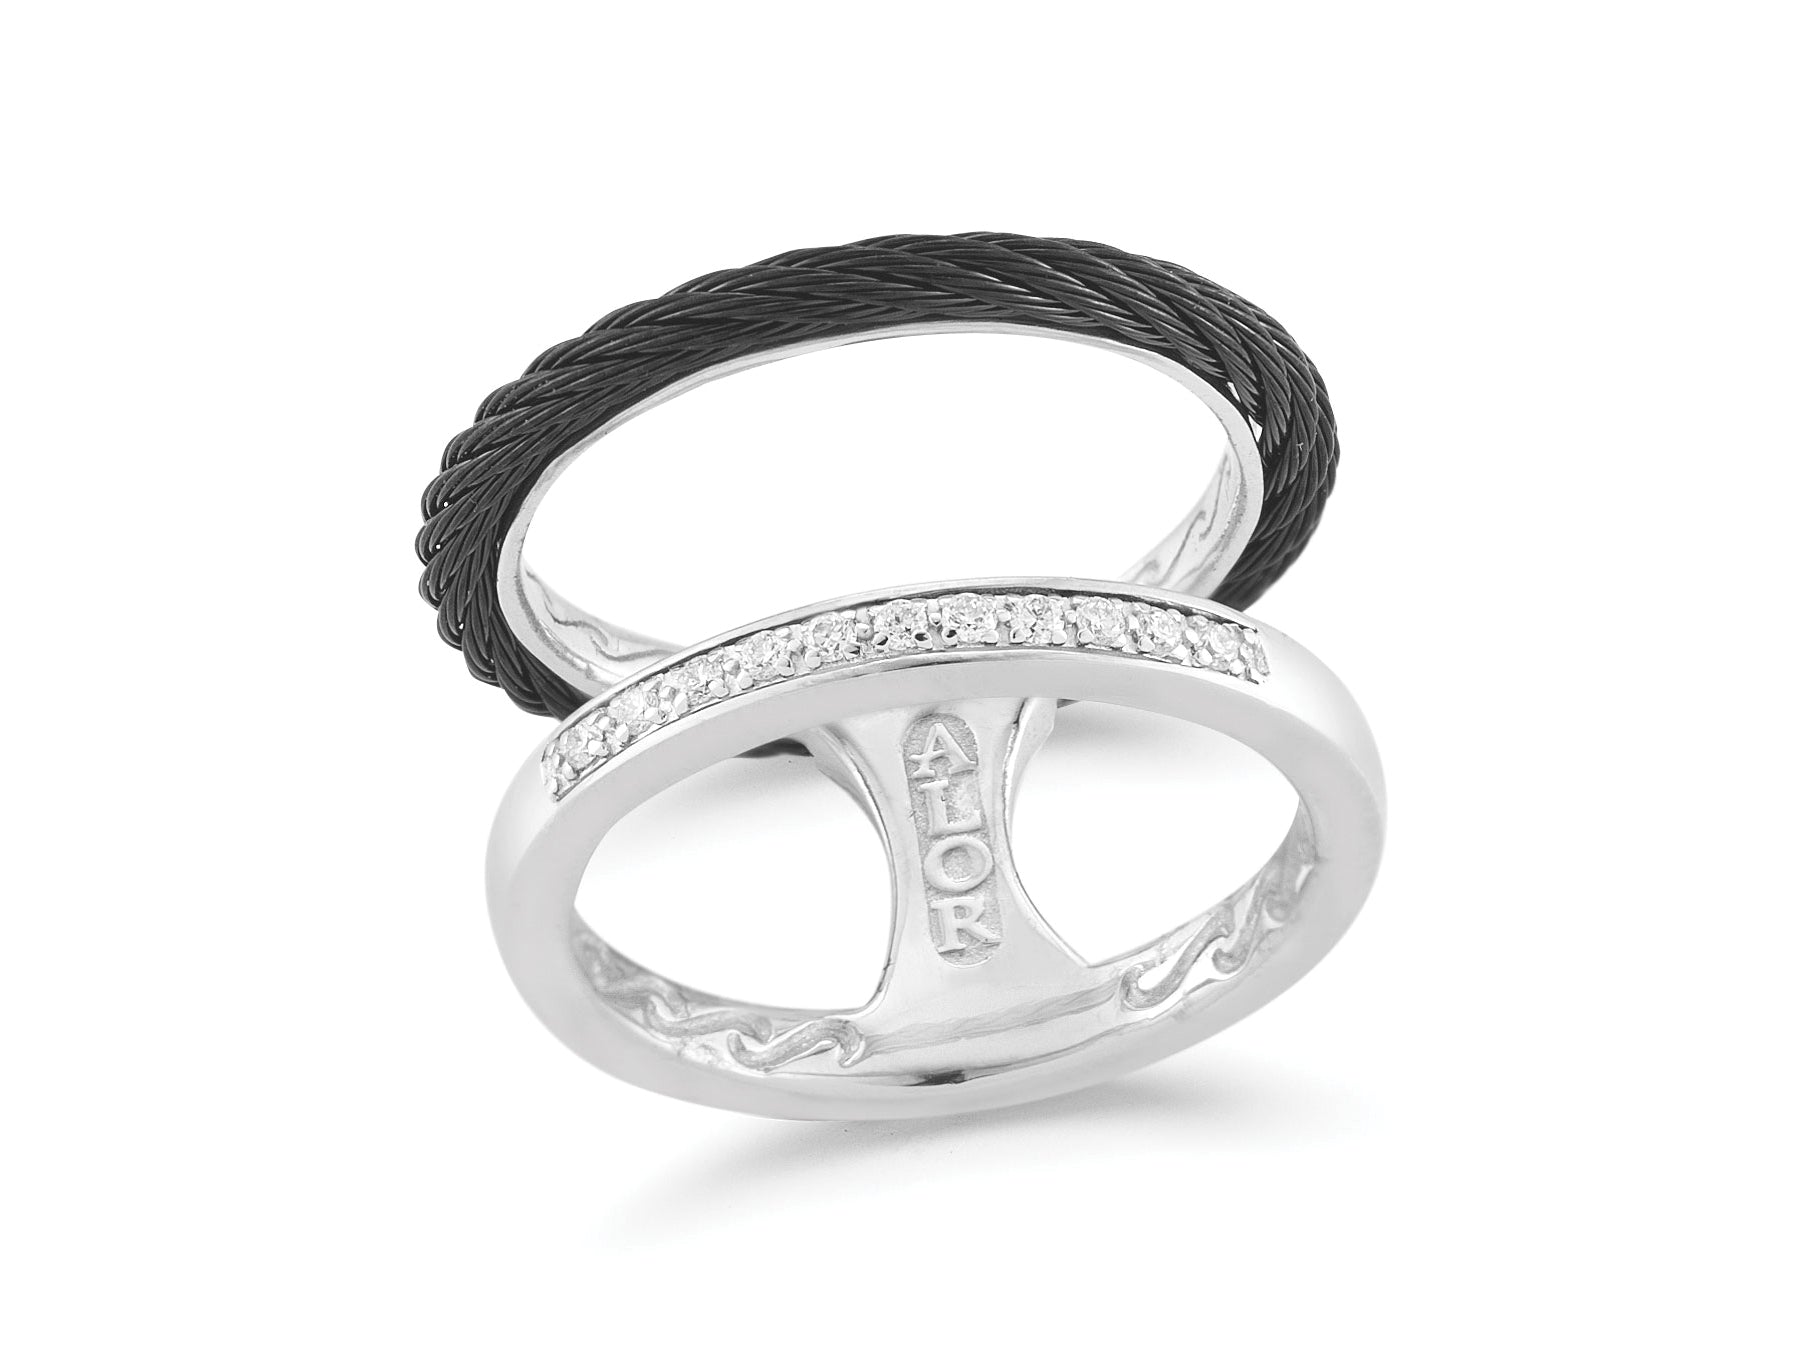 Alor Black cable, 18kt White Gold, 0.09 total carat weight Diamonds and stainless steel. Imported.